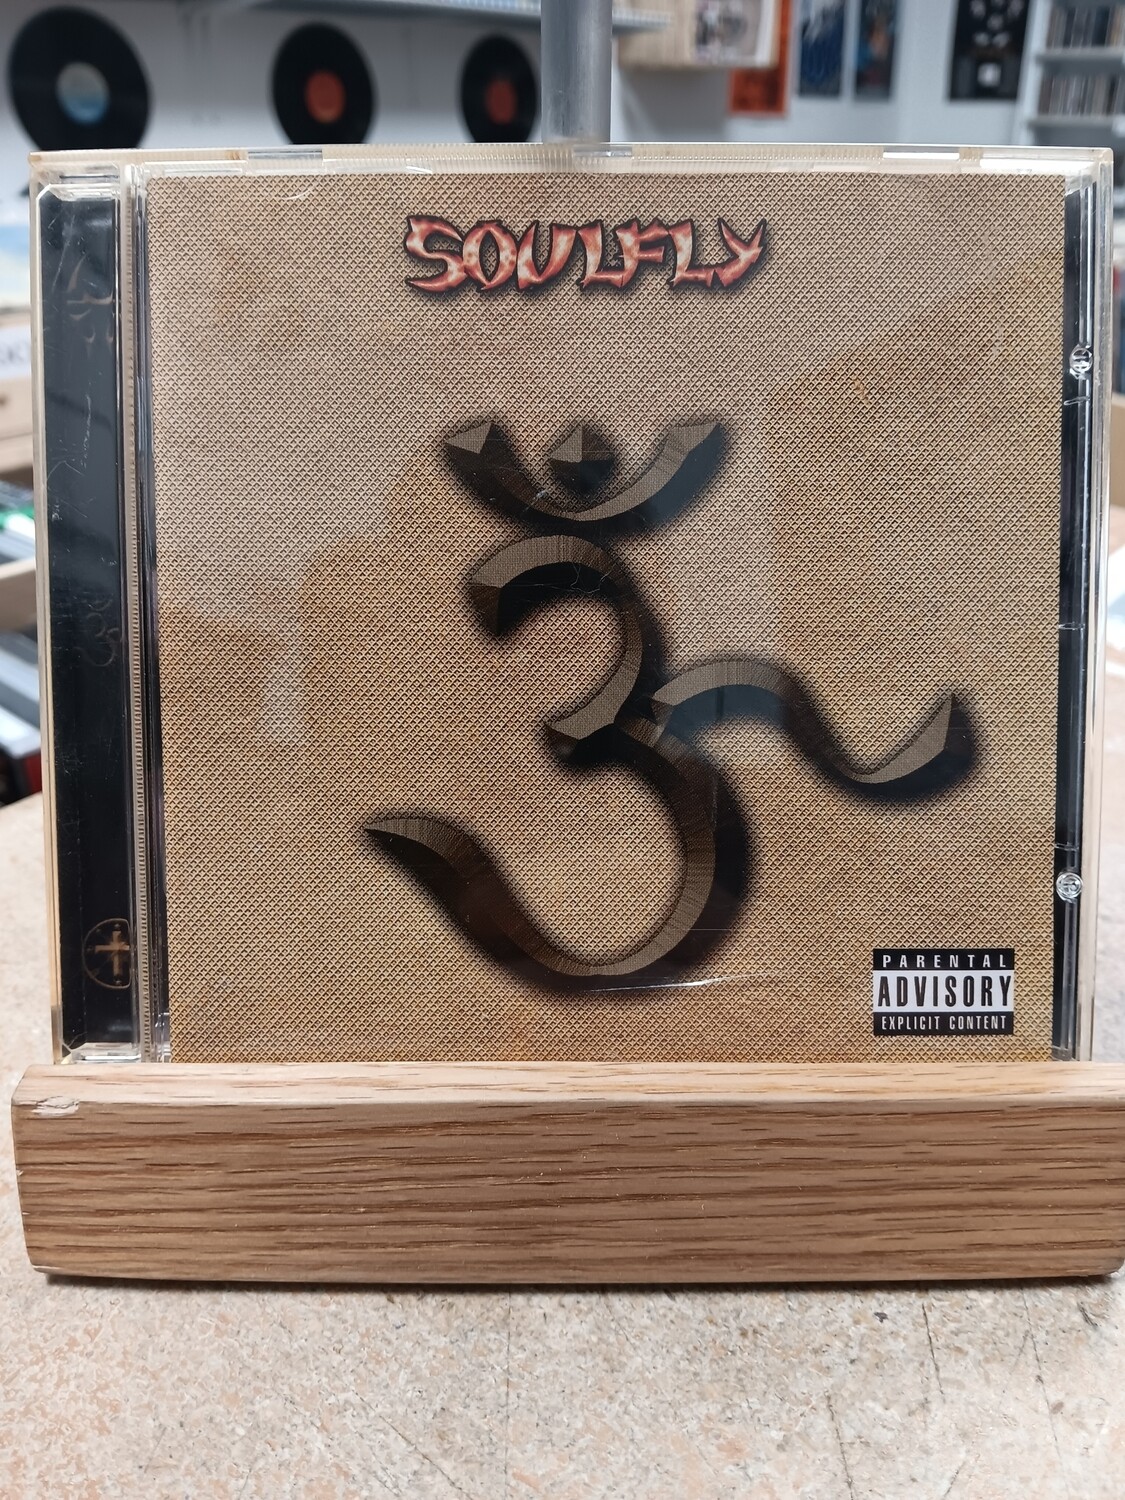 Soufly - 3 (CD)